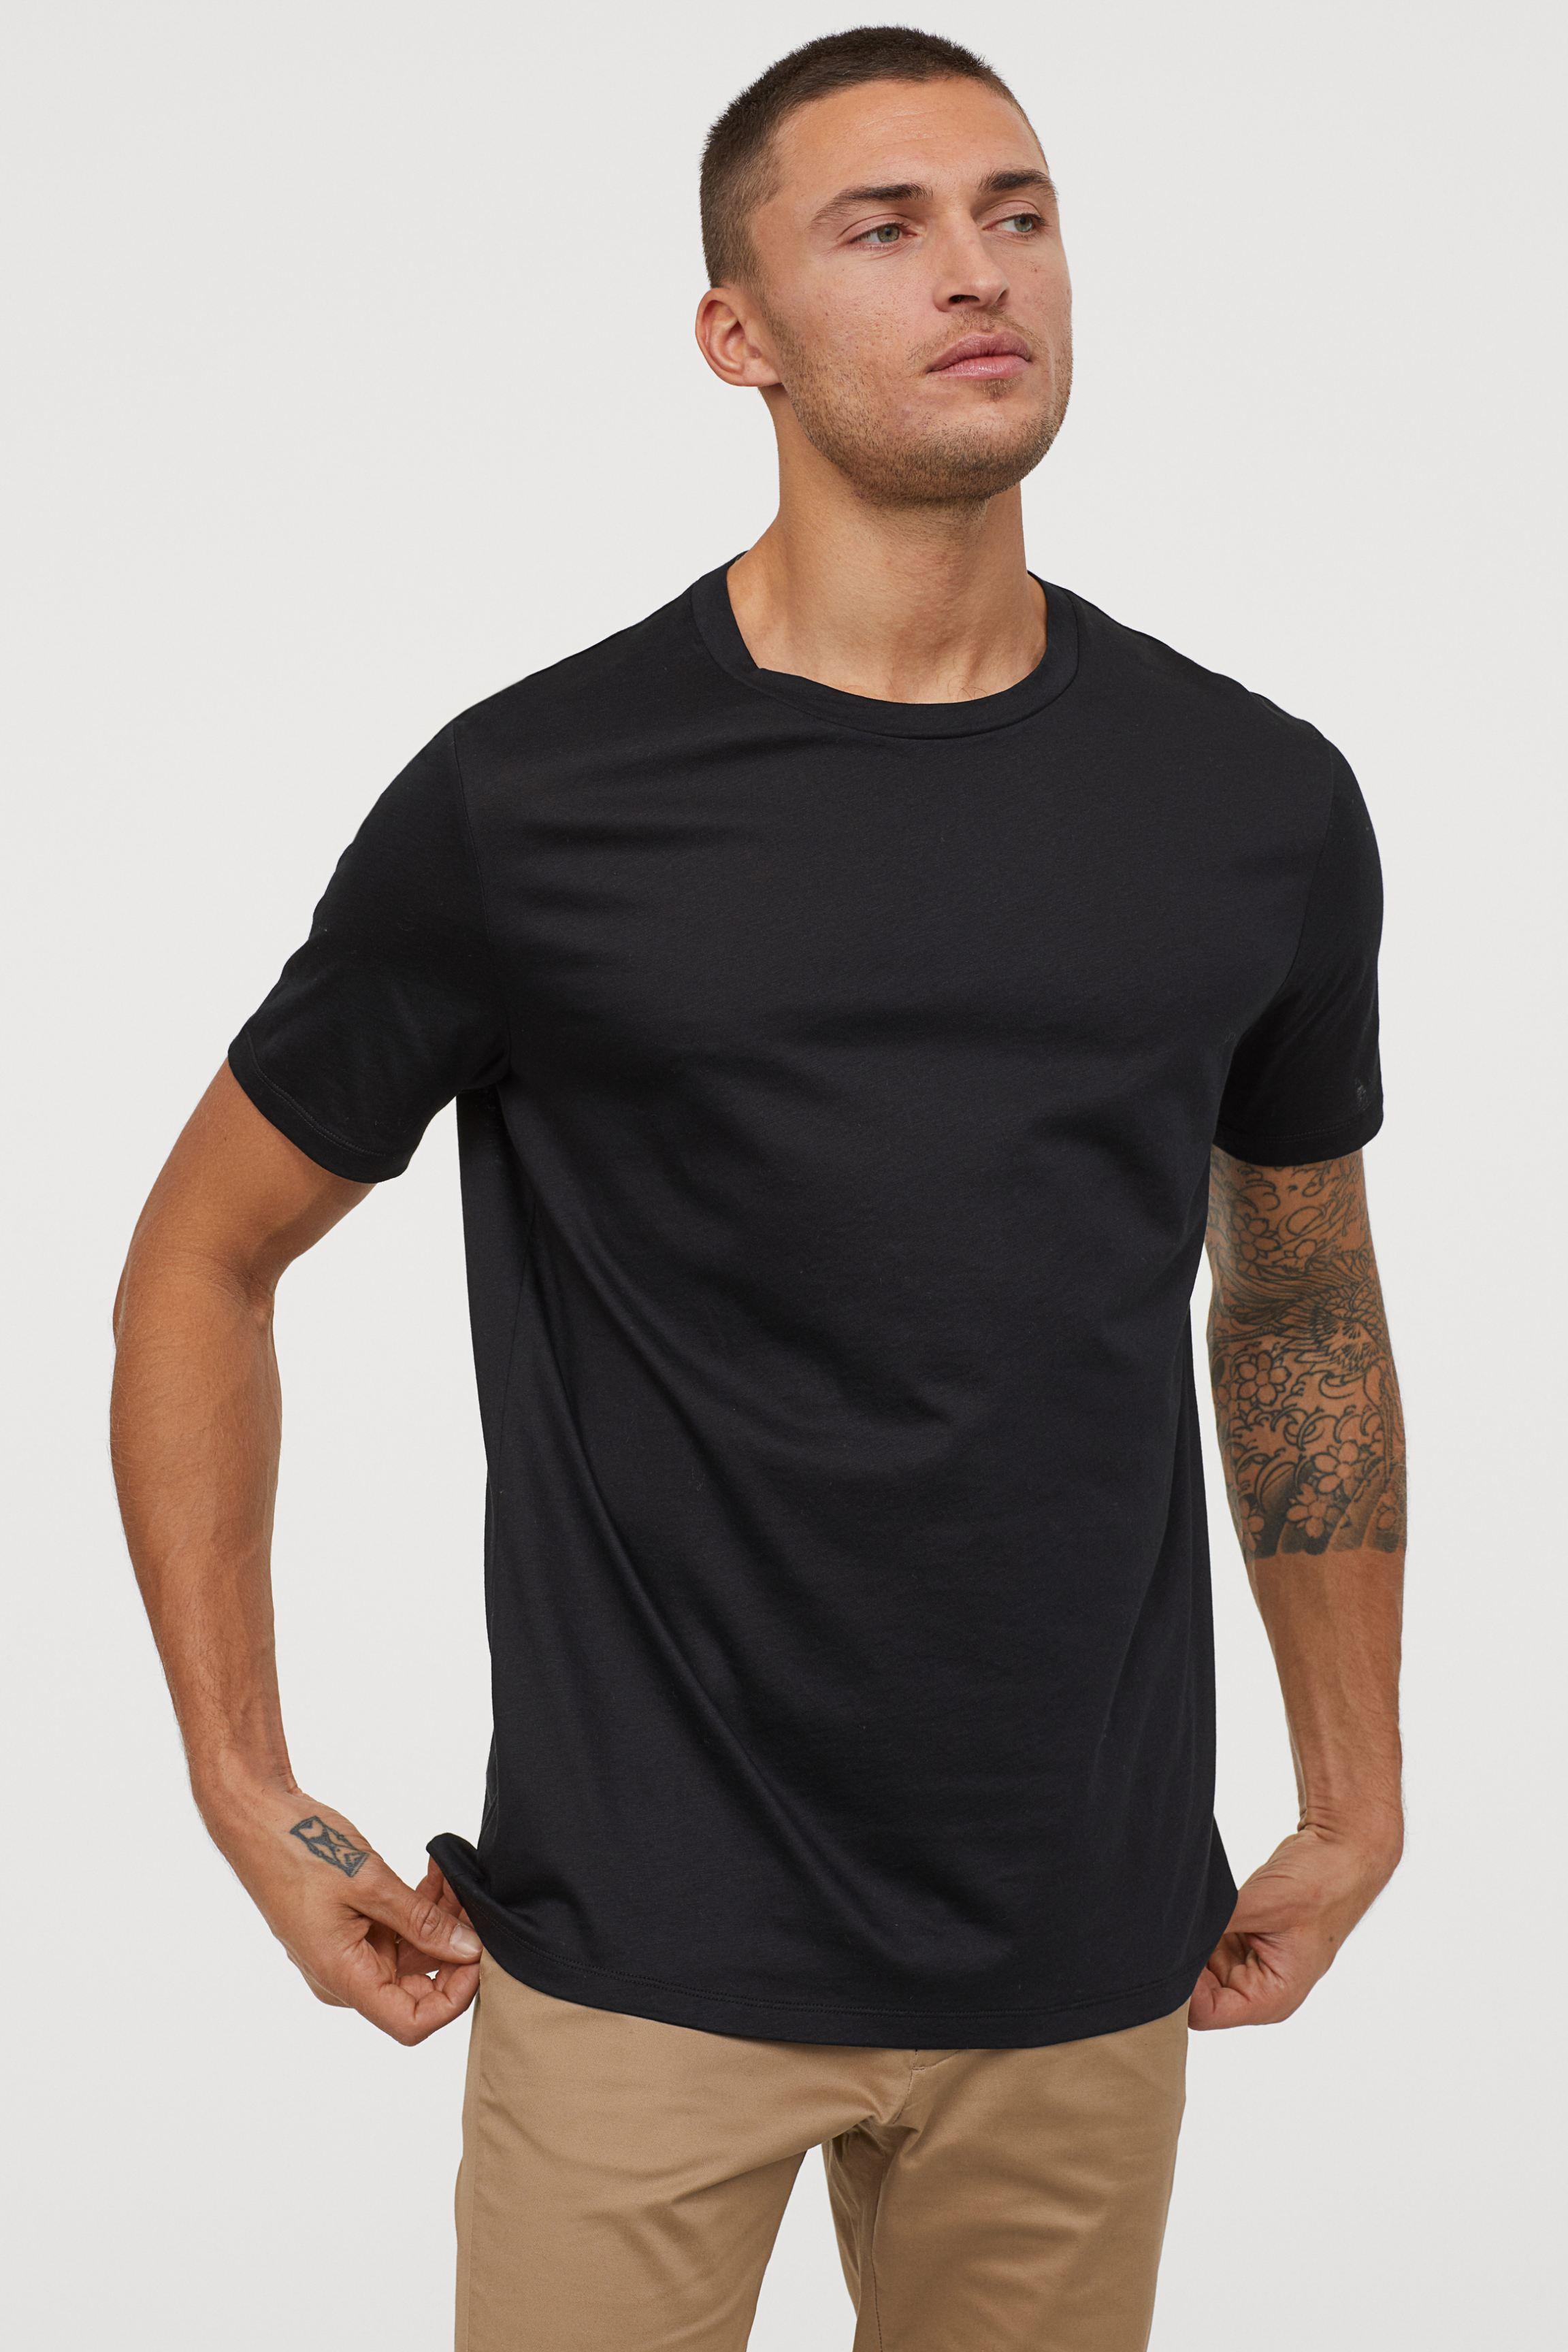 H&M Cotton And Silk T-shirt in Black for Men - Lyst